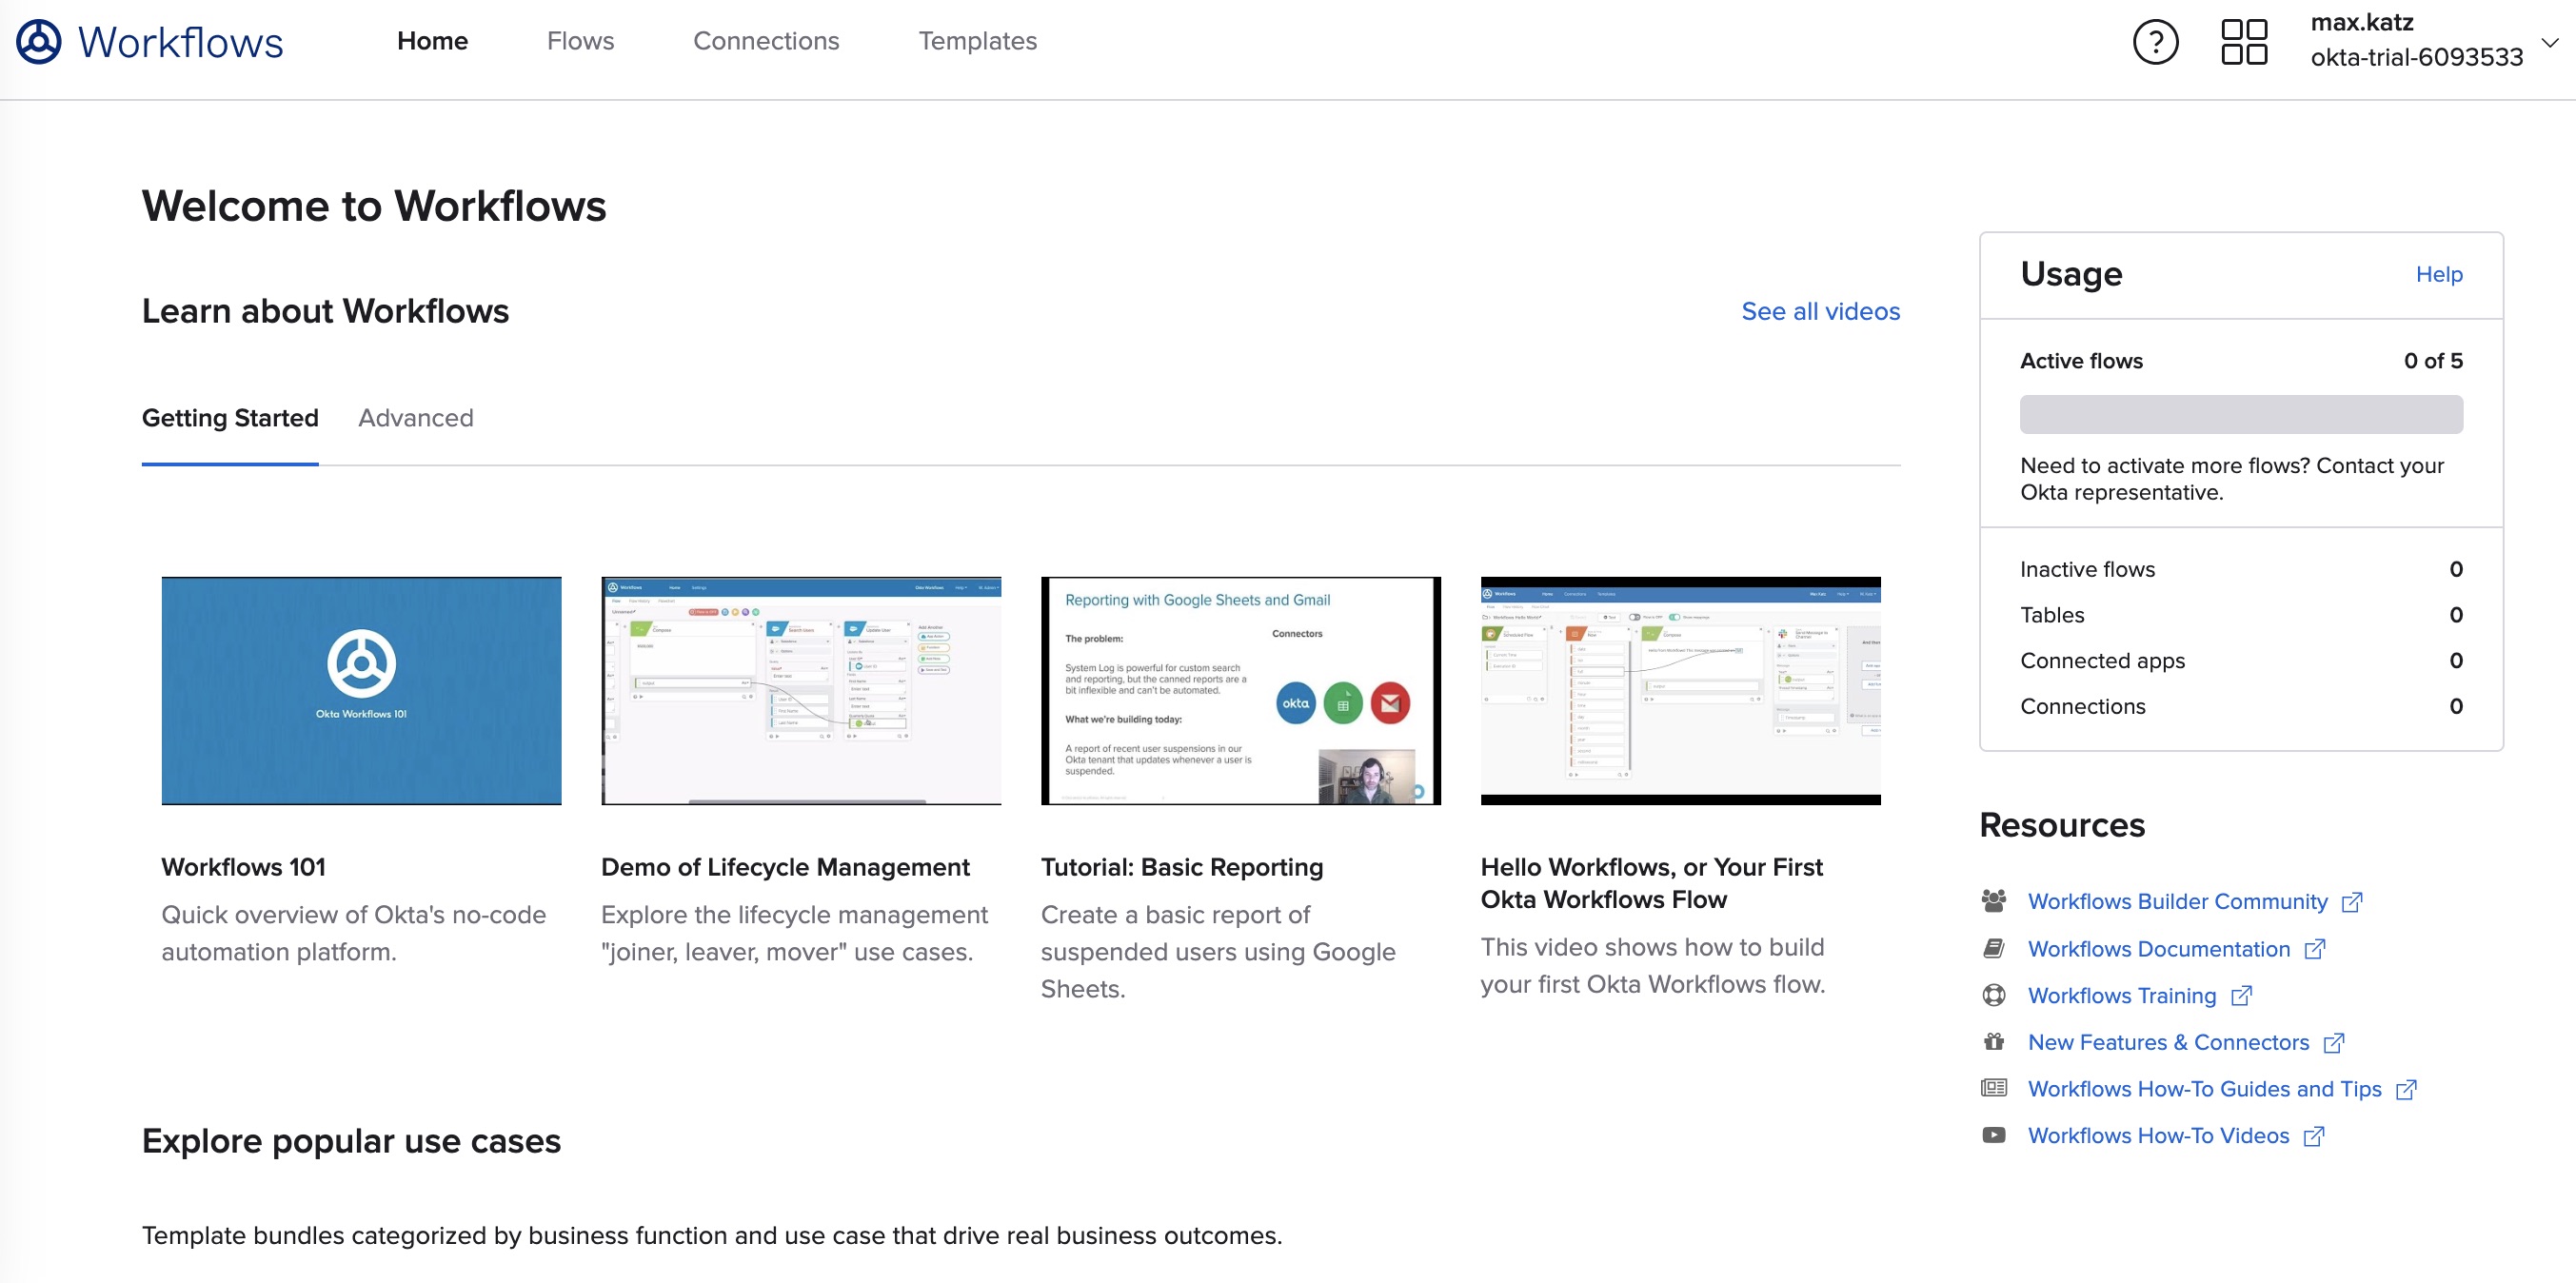 Workflows home page